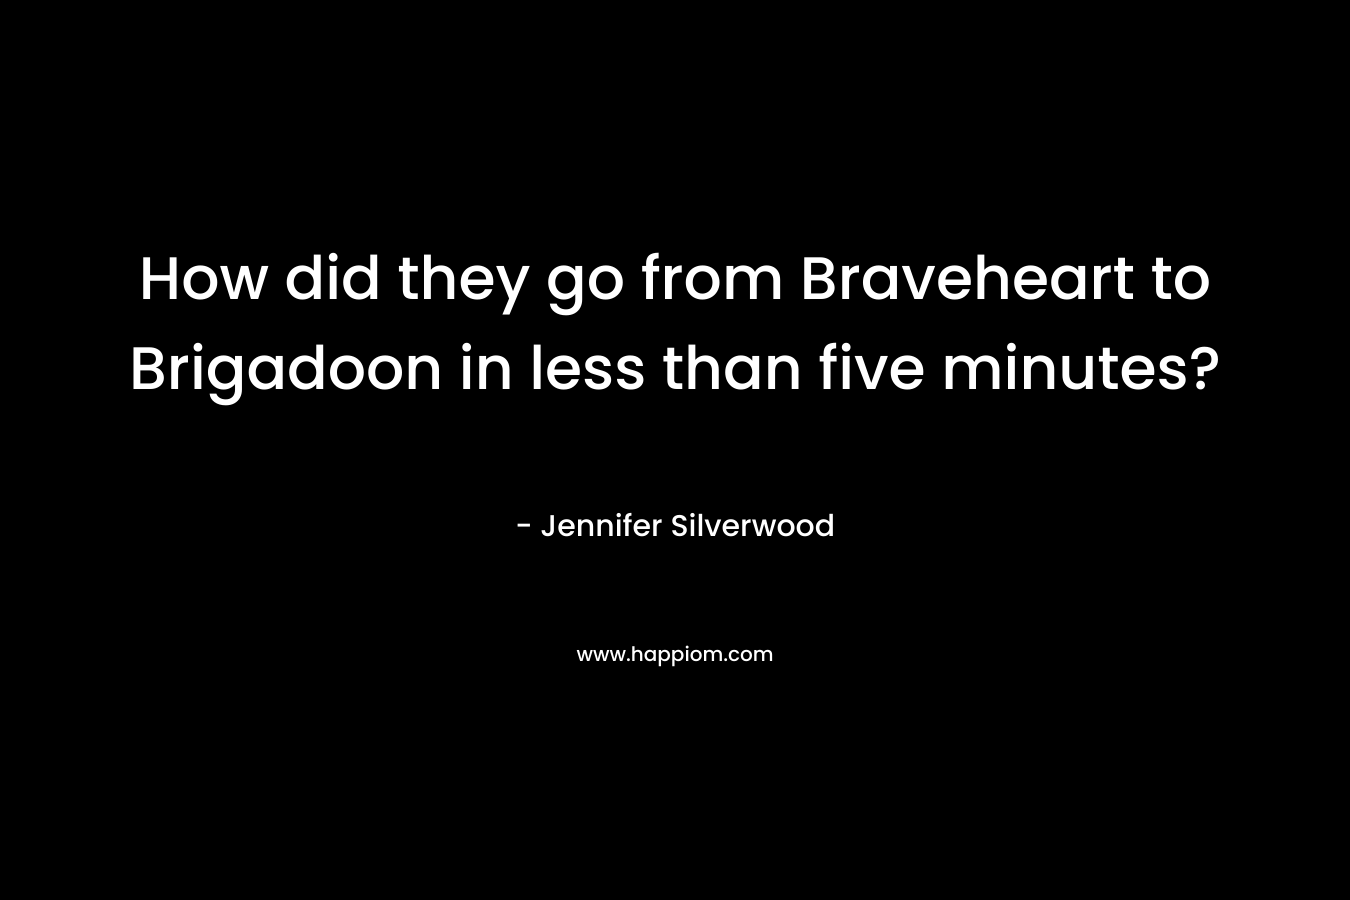 How did they go from Braveheart to Brigadoon in less than five minutes?